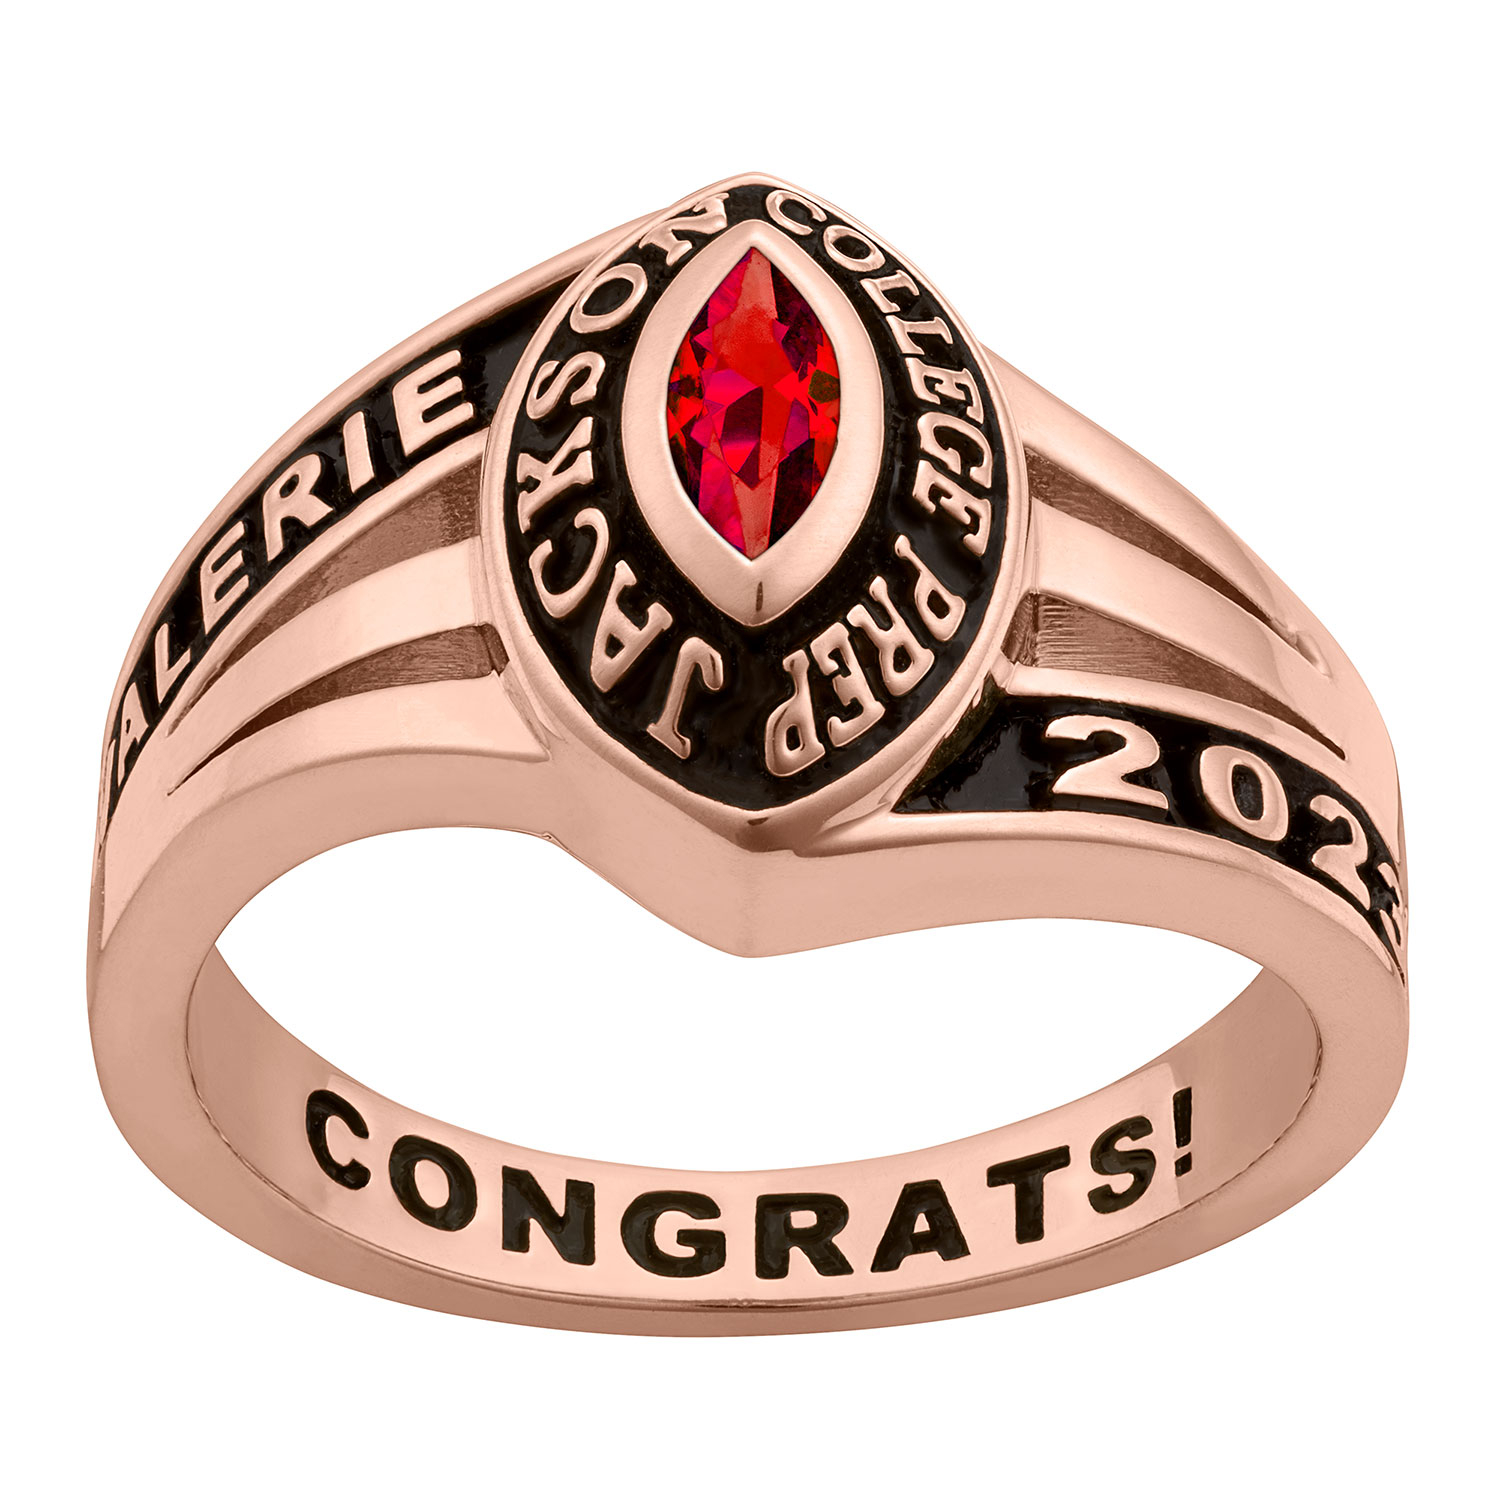 Ladies' 14K Rose Gold over Sterling Birthstone Traditional Class Ring